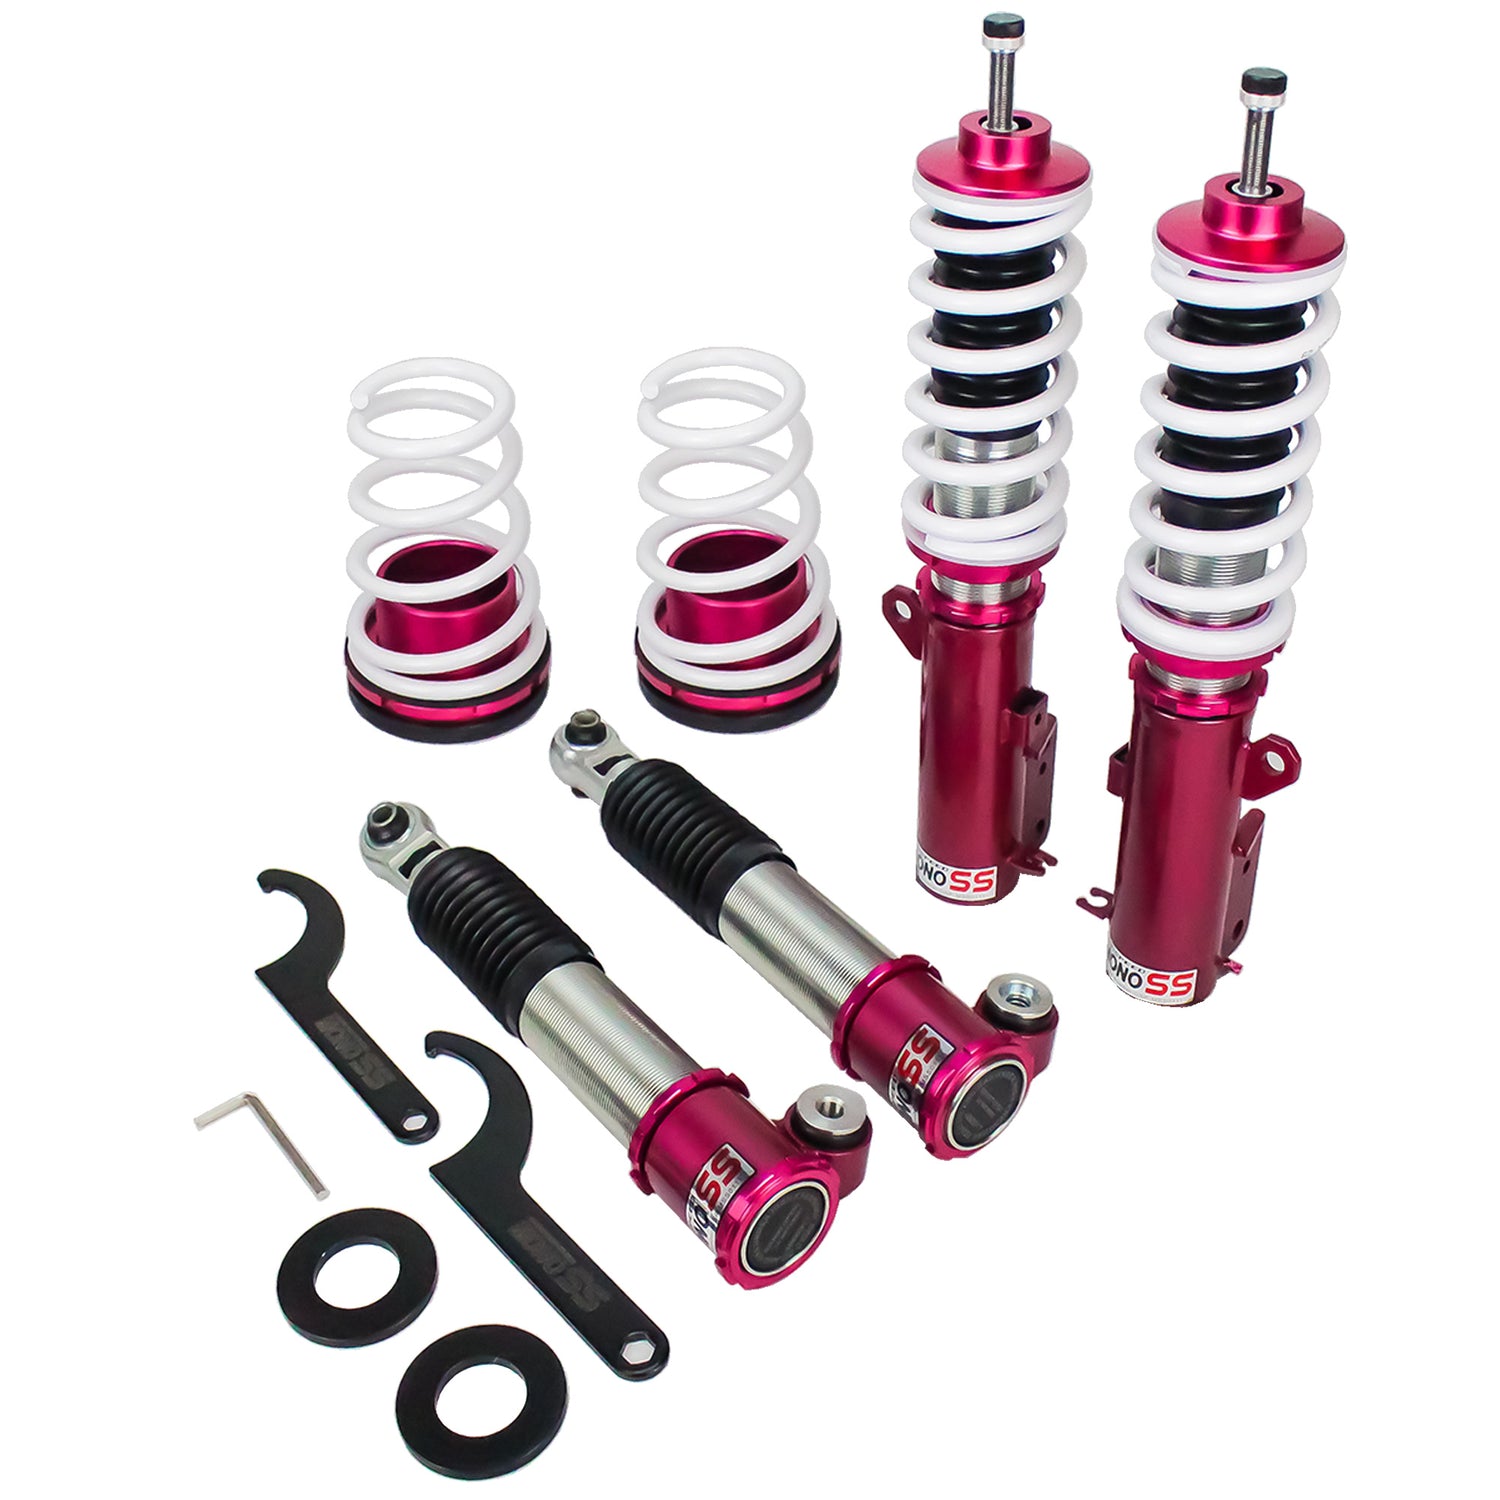 Godspeed MSS0111-A MonoSS Coilover Lowering Kit, Fully Adjustable, Ride Height, Spring Tension And 16 Click Damping, Hyundai Accent(RB) 2012-17